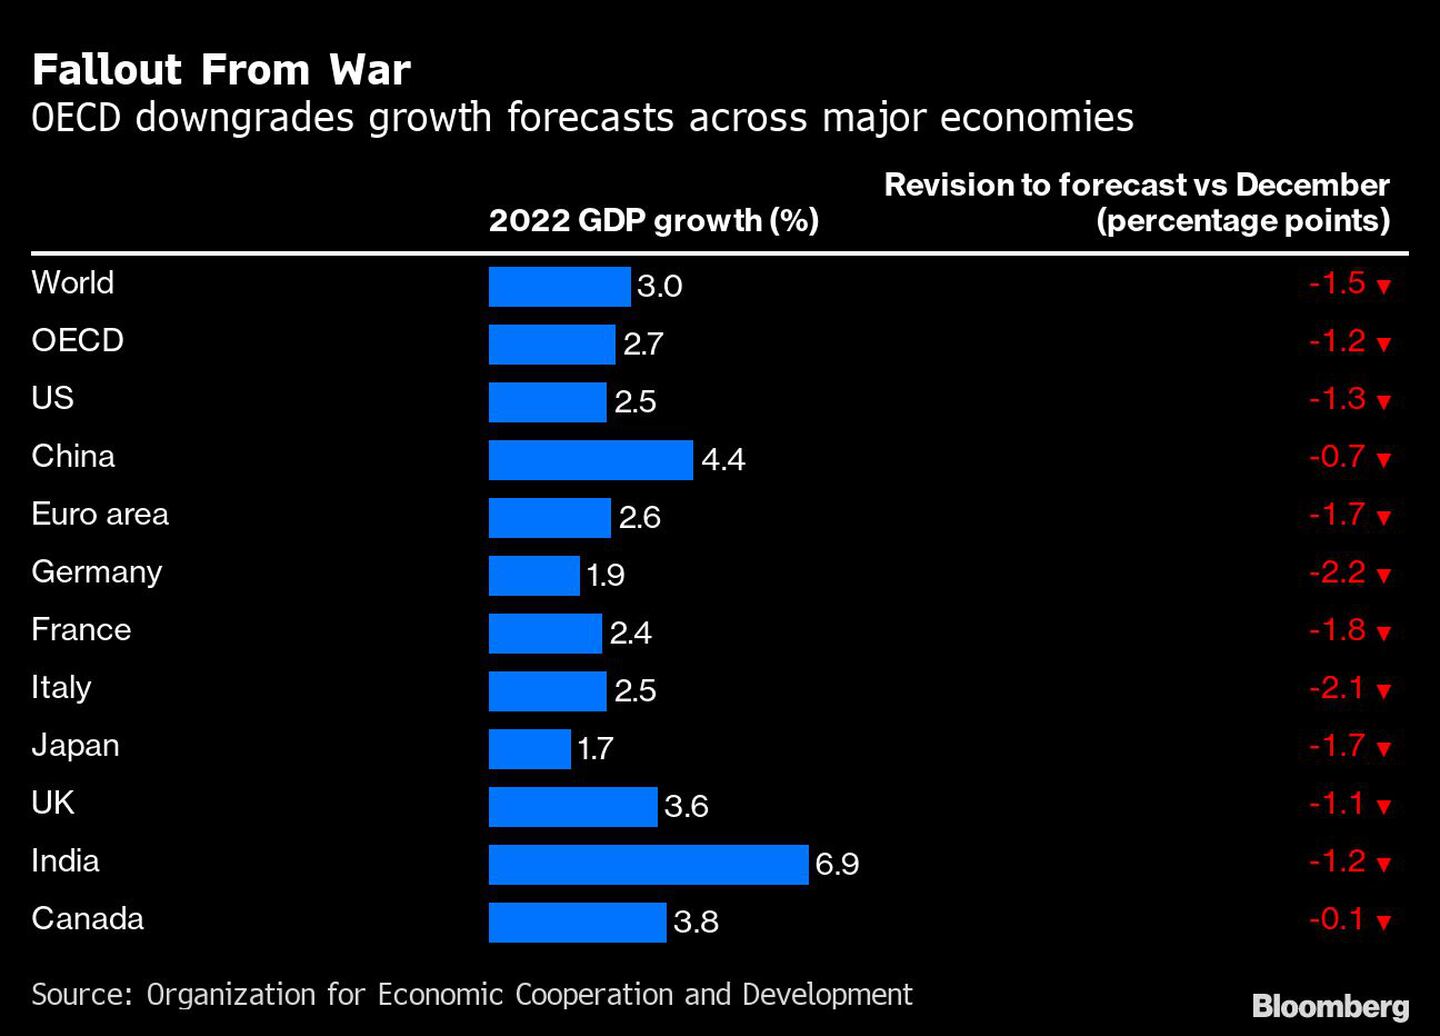 Fallout From War | OECD downgrades growth forecasts across major economiesdfd